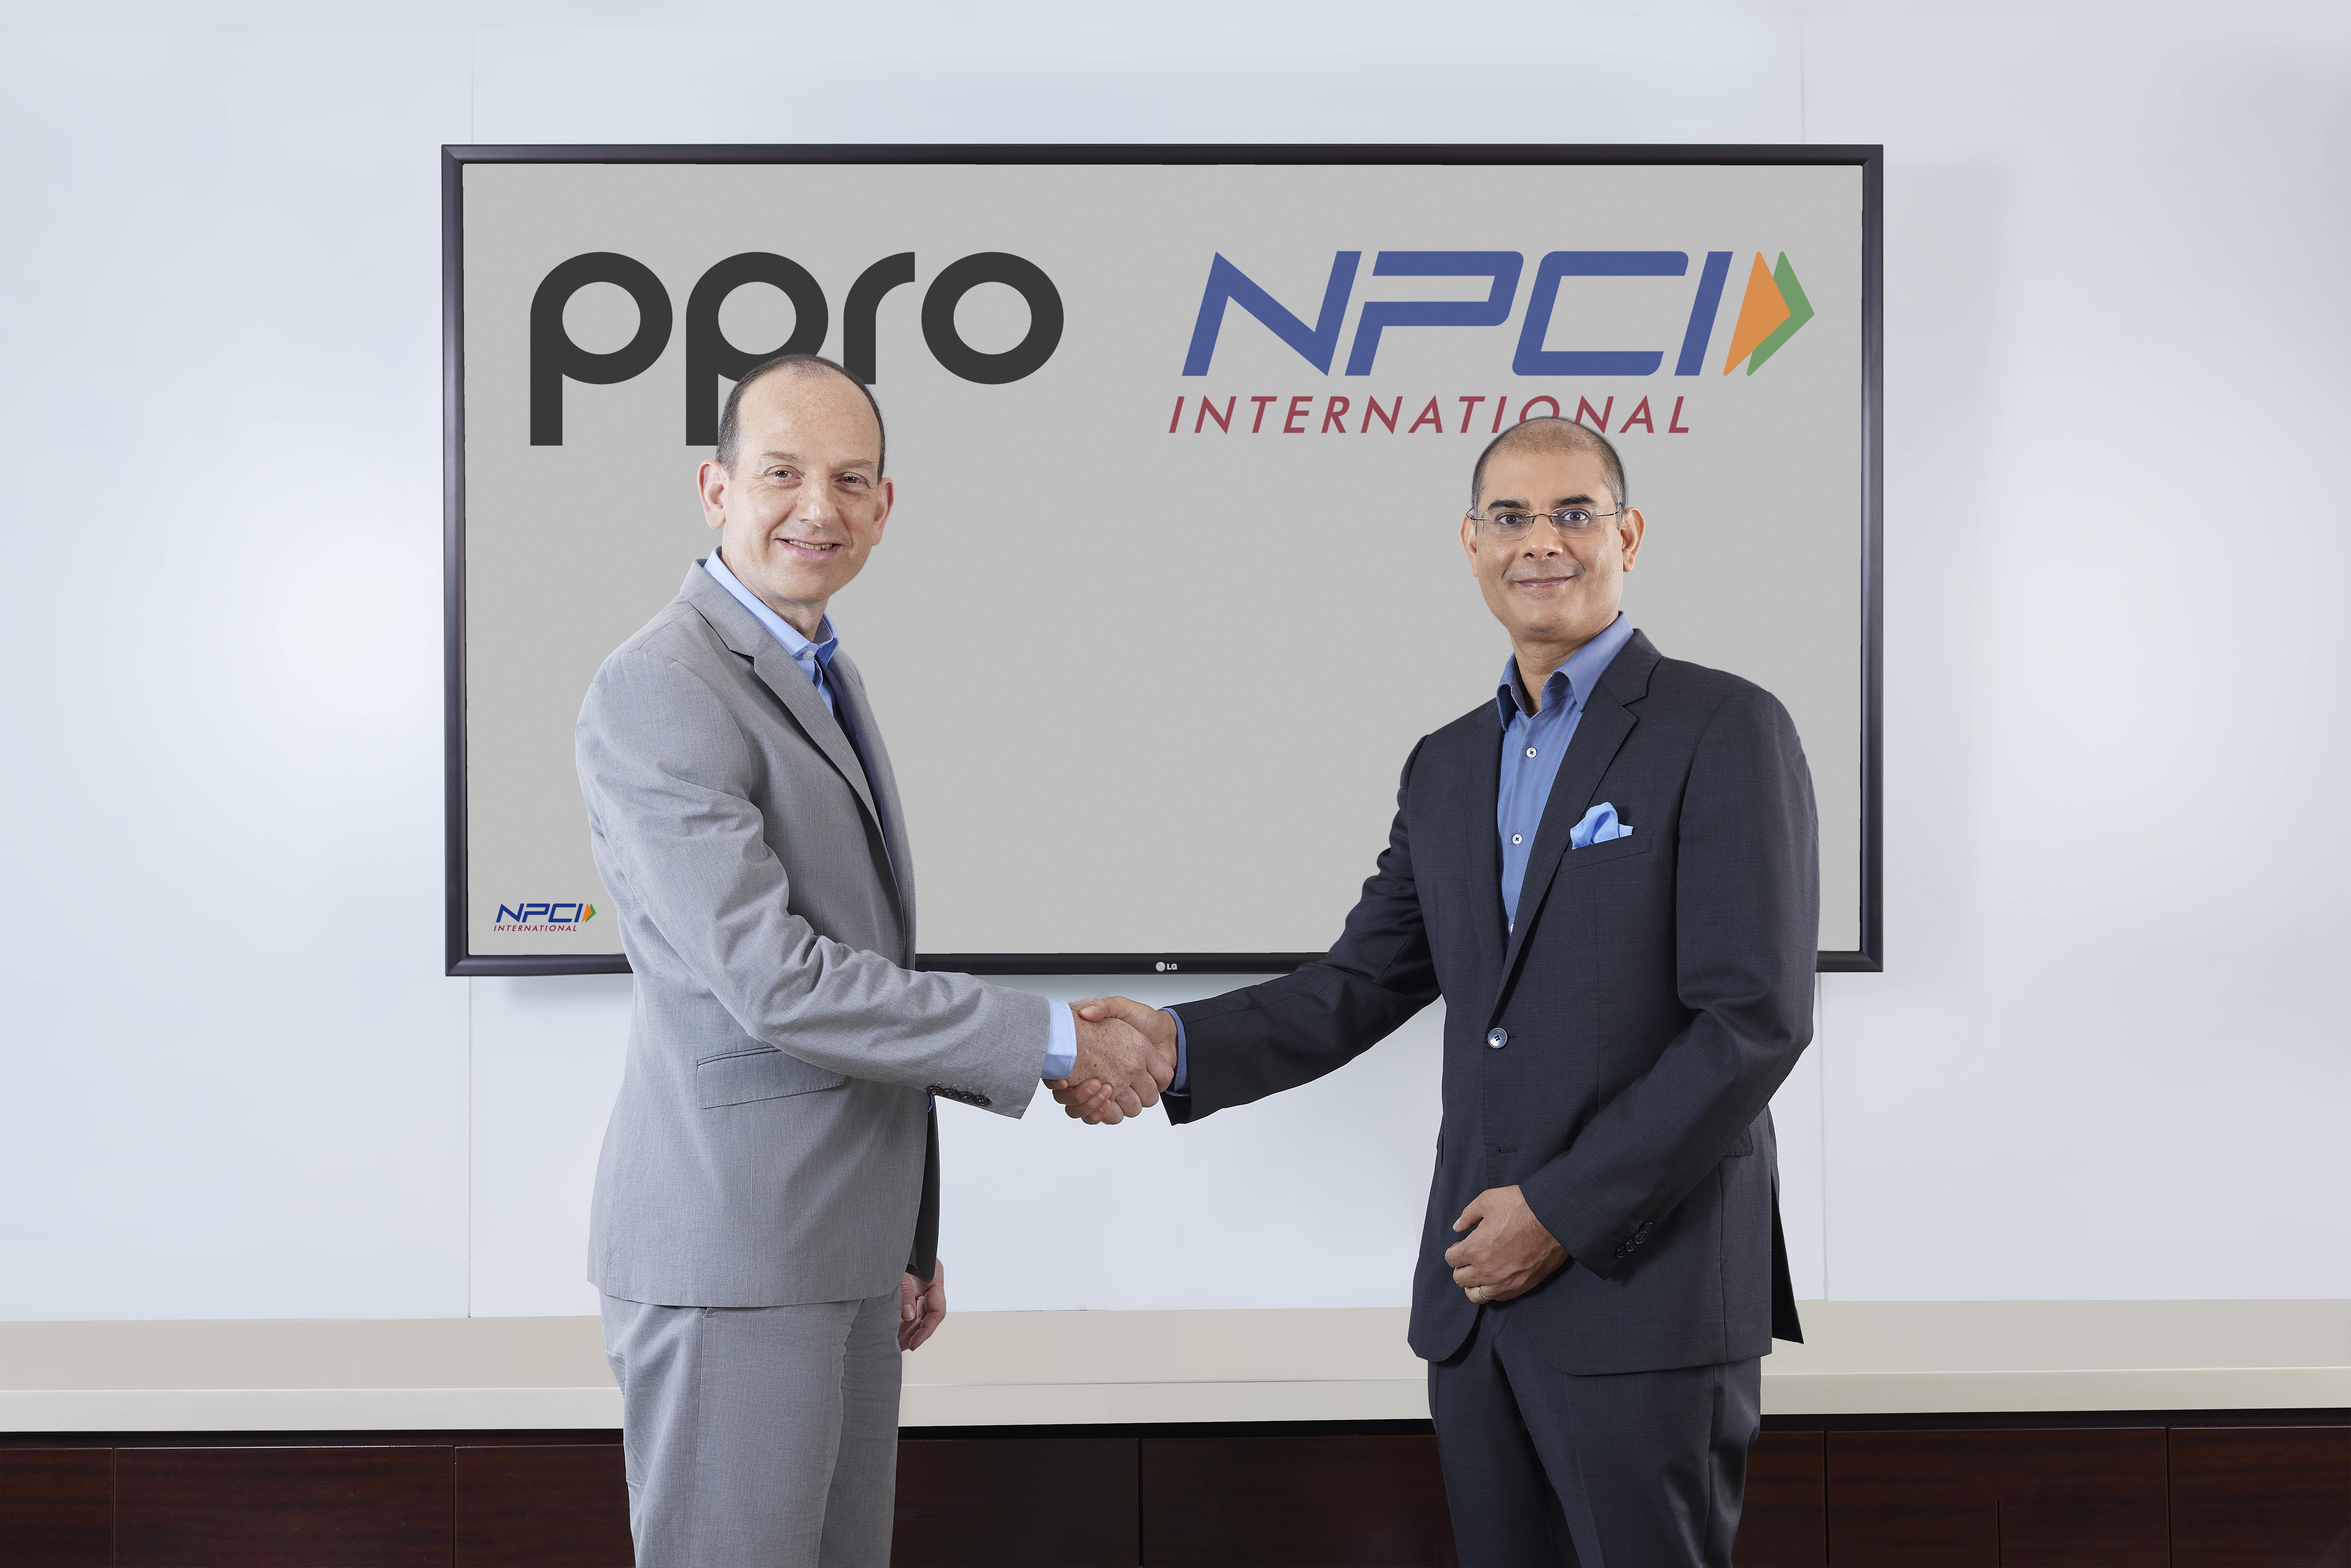 NPCI International partners with PPRO to enable ecommerce payments globally